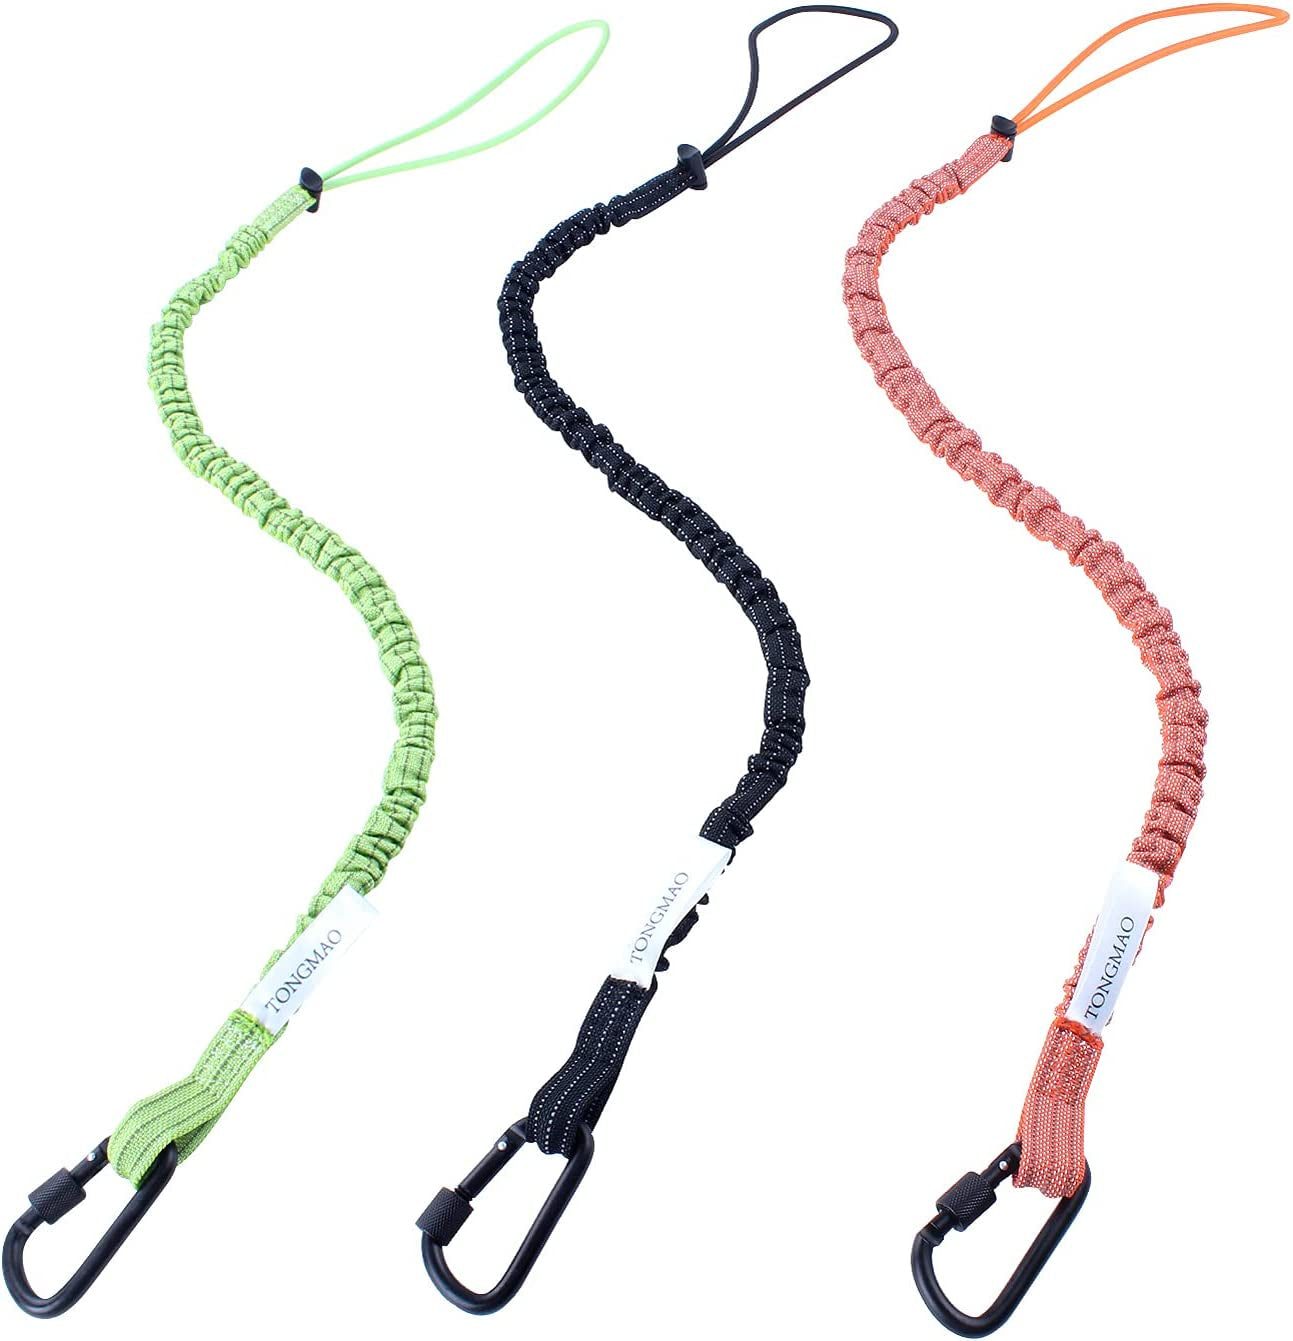 TONGMAO, TONGMAO 3 Pack Retractable Tool Lanyard, Safety Fall Protection Tools Leash with Aluminum Screw Lock Carabiner Clip and Adjustable Loop End, Tough Scaffold Tether (Black+Orange+Green)